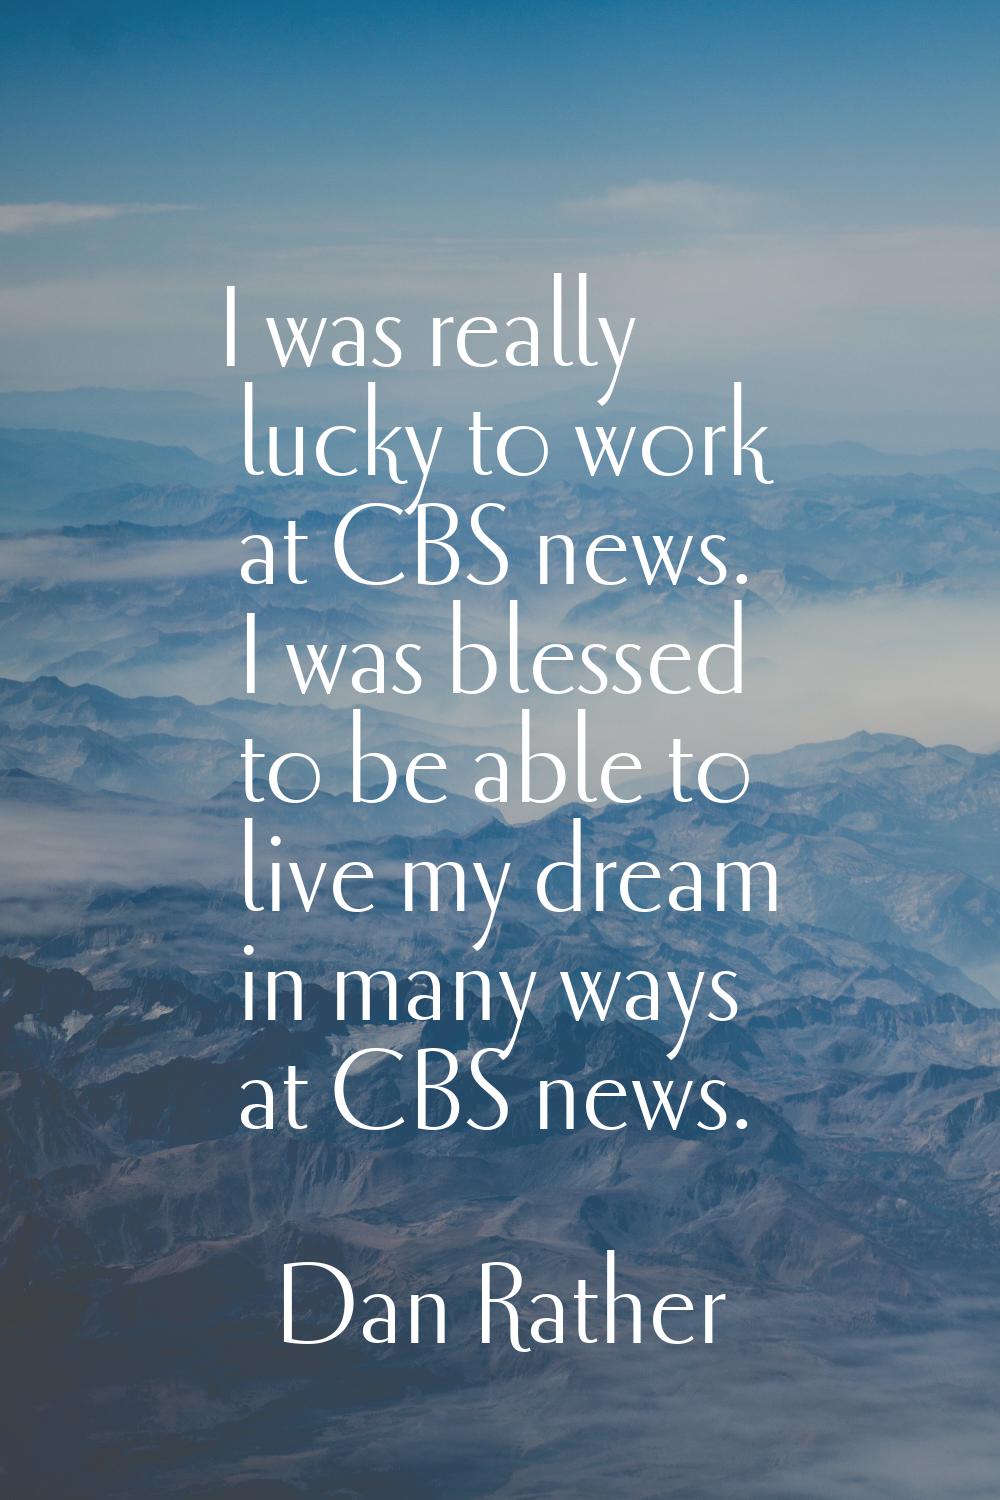 I was really lucky to work at CBS news. I was blessed to be able to live my dream in many ways at C